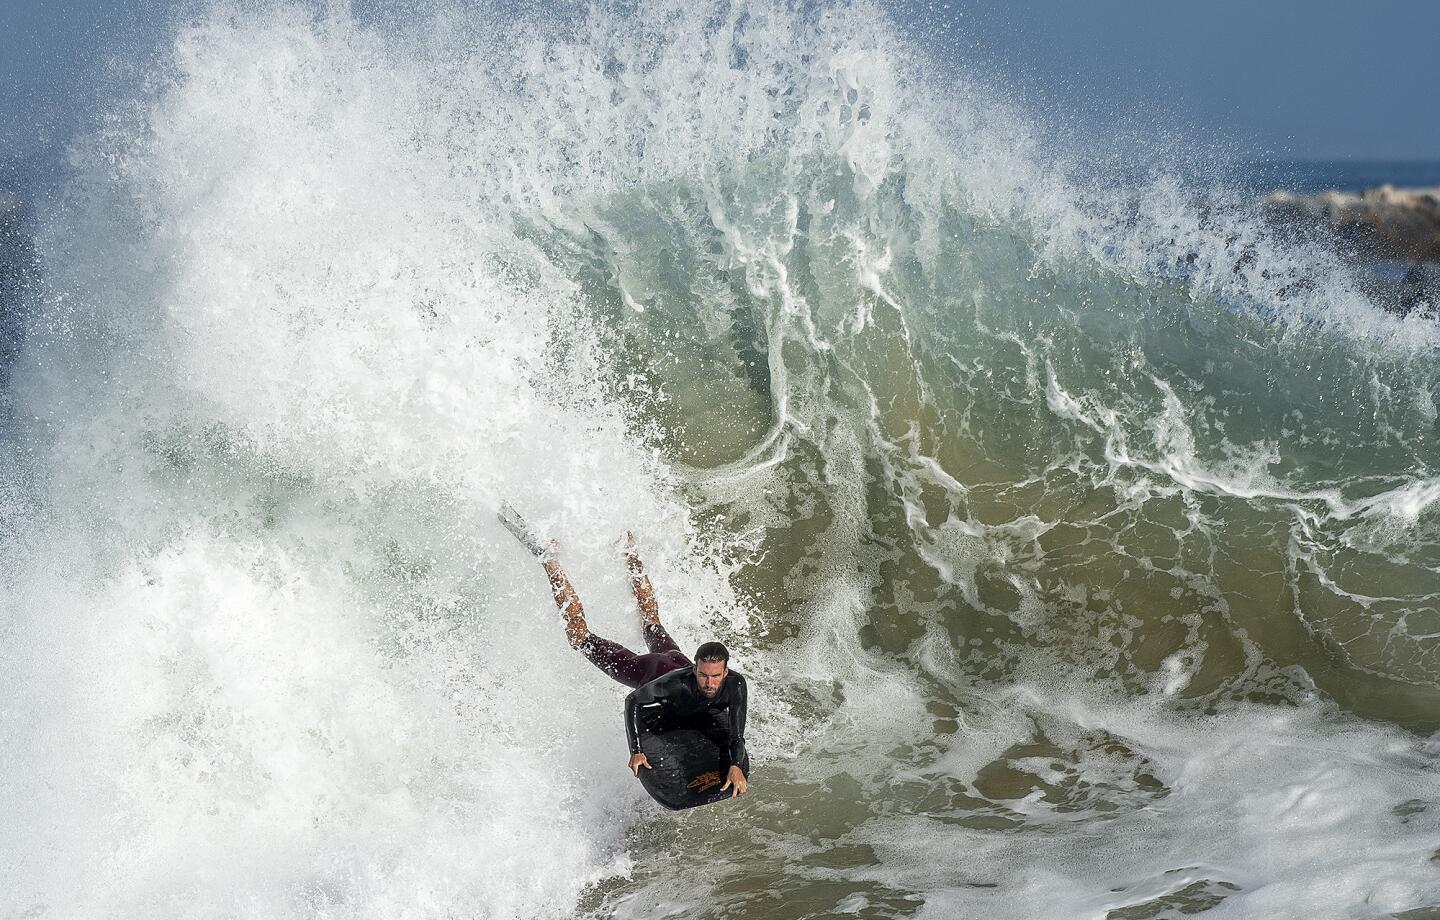 A bodyboarder drops into a wave at the Wedge in Newport Beach on Monday.